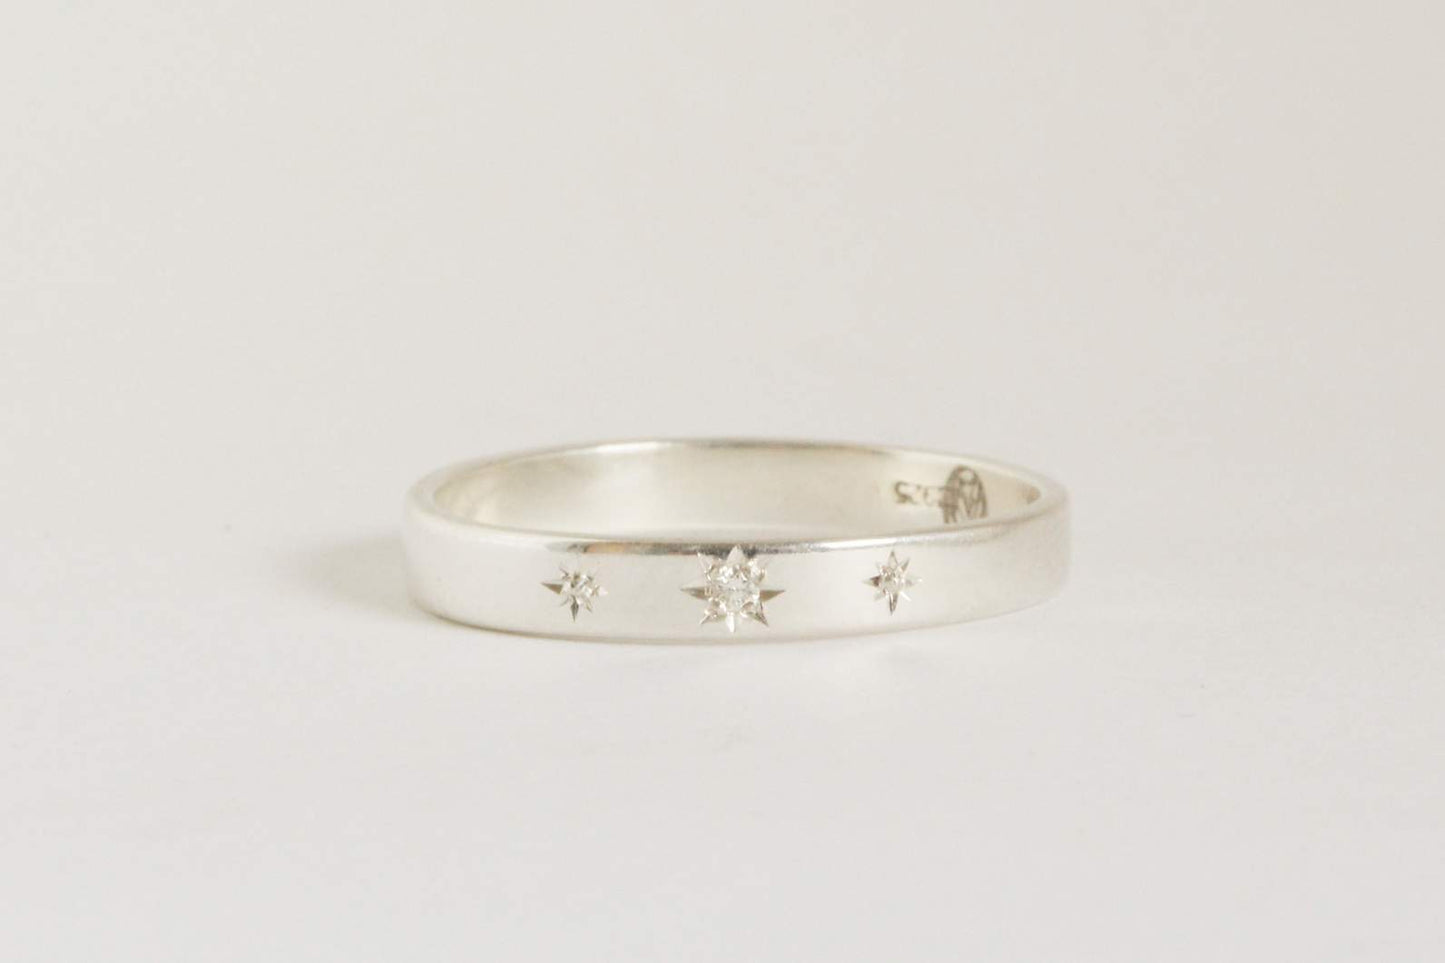 Starry starry ngaio ring